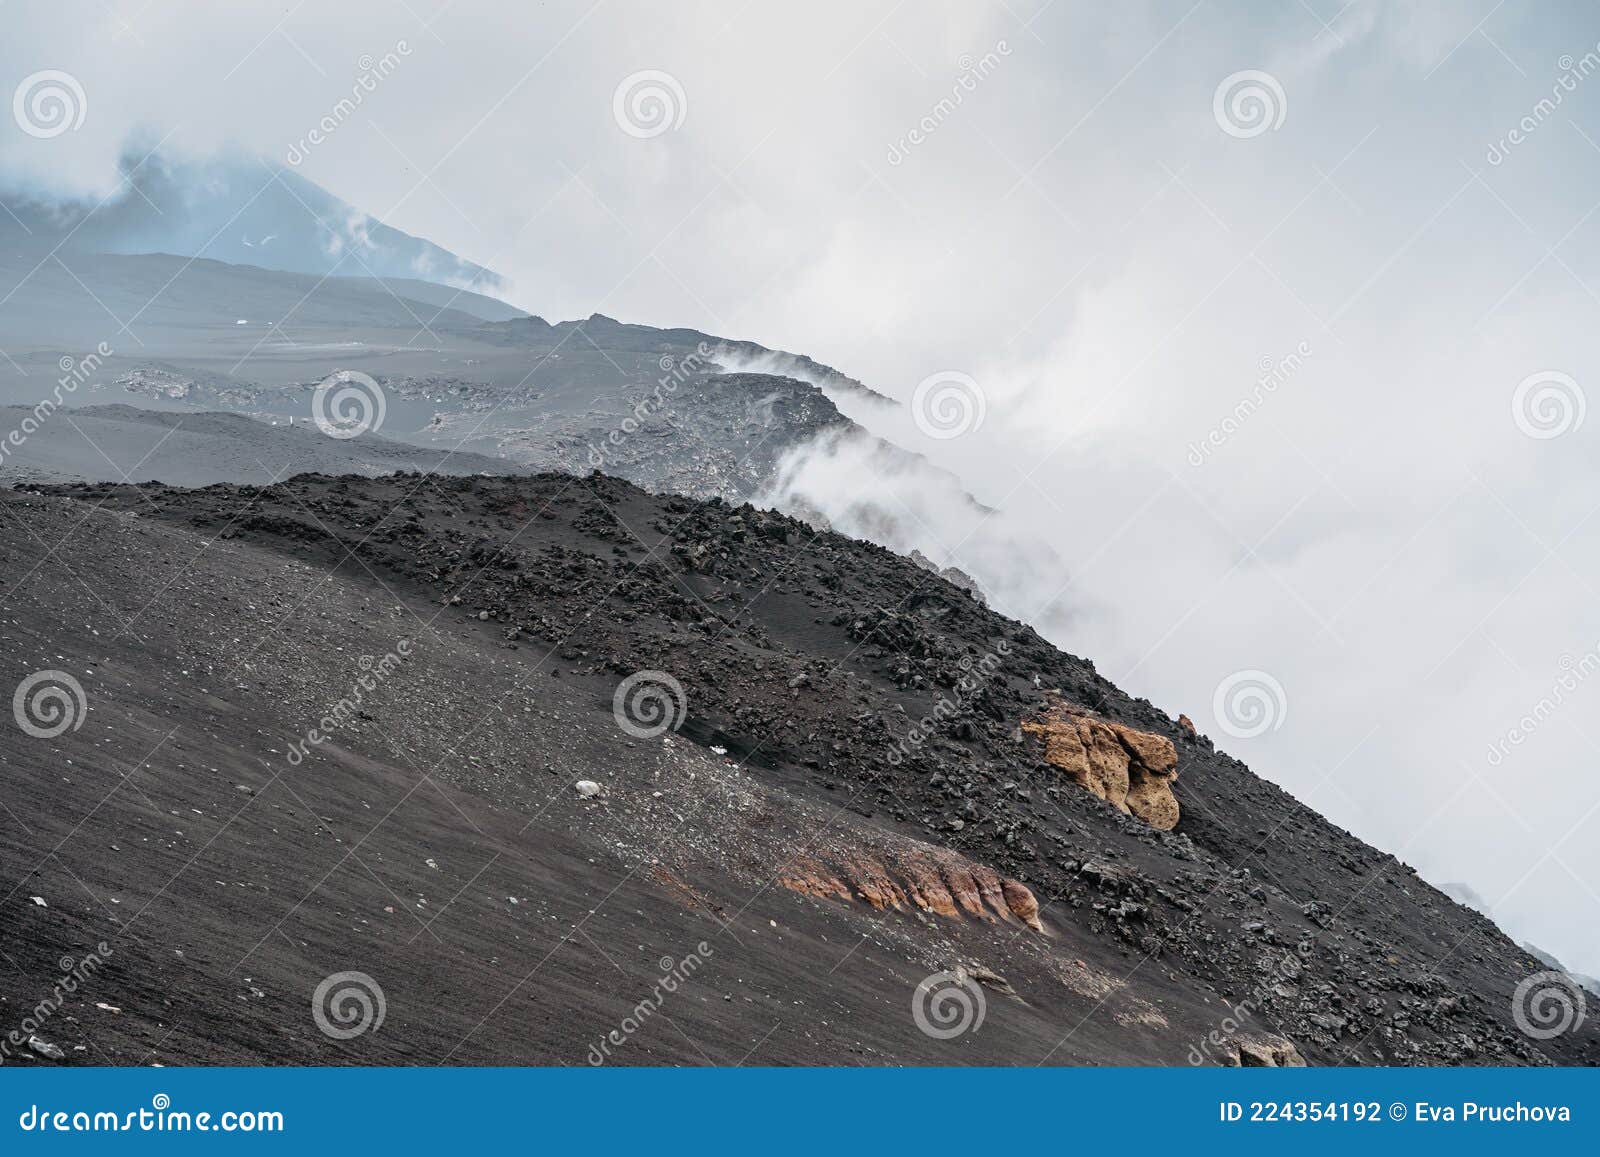 crater of etna,sicily,italy.adventure outdoor activity.excursion on summit of volcano.parco dell`etna,protected nature area.trave